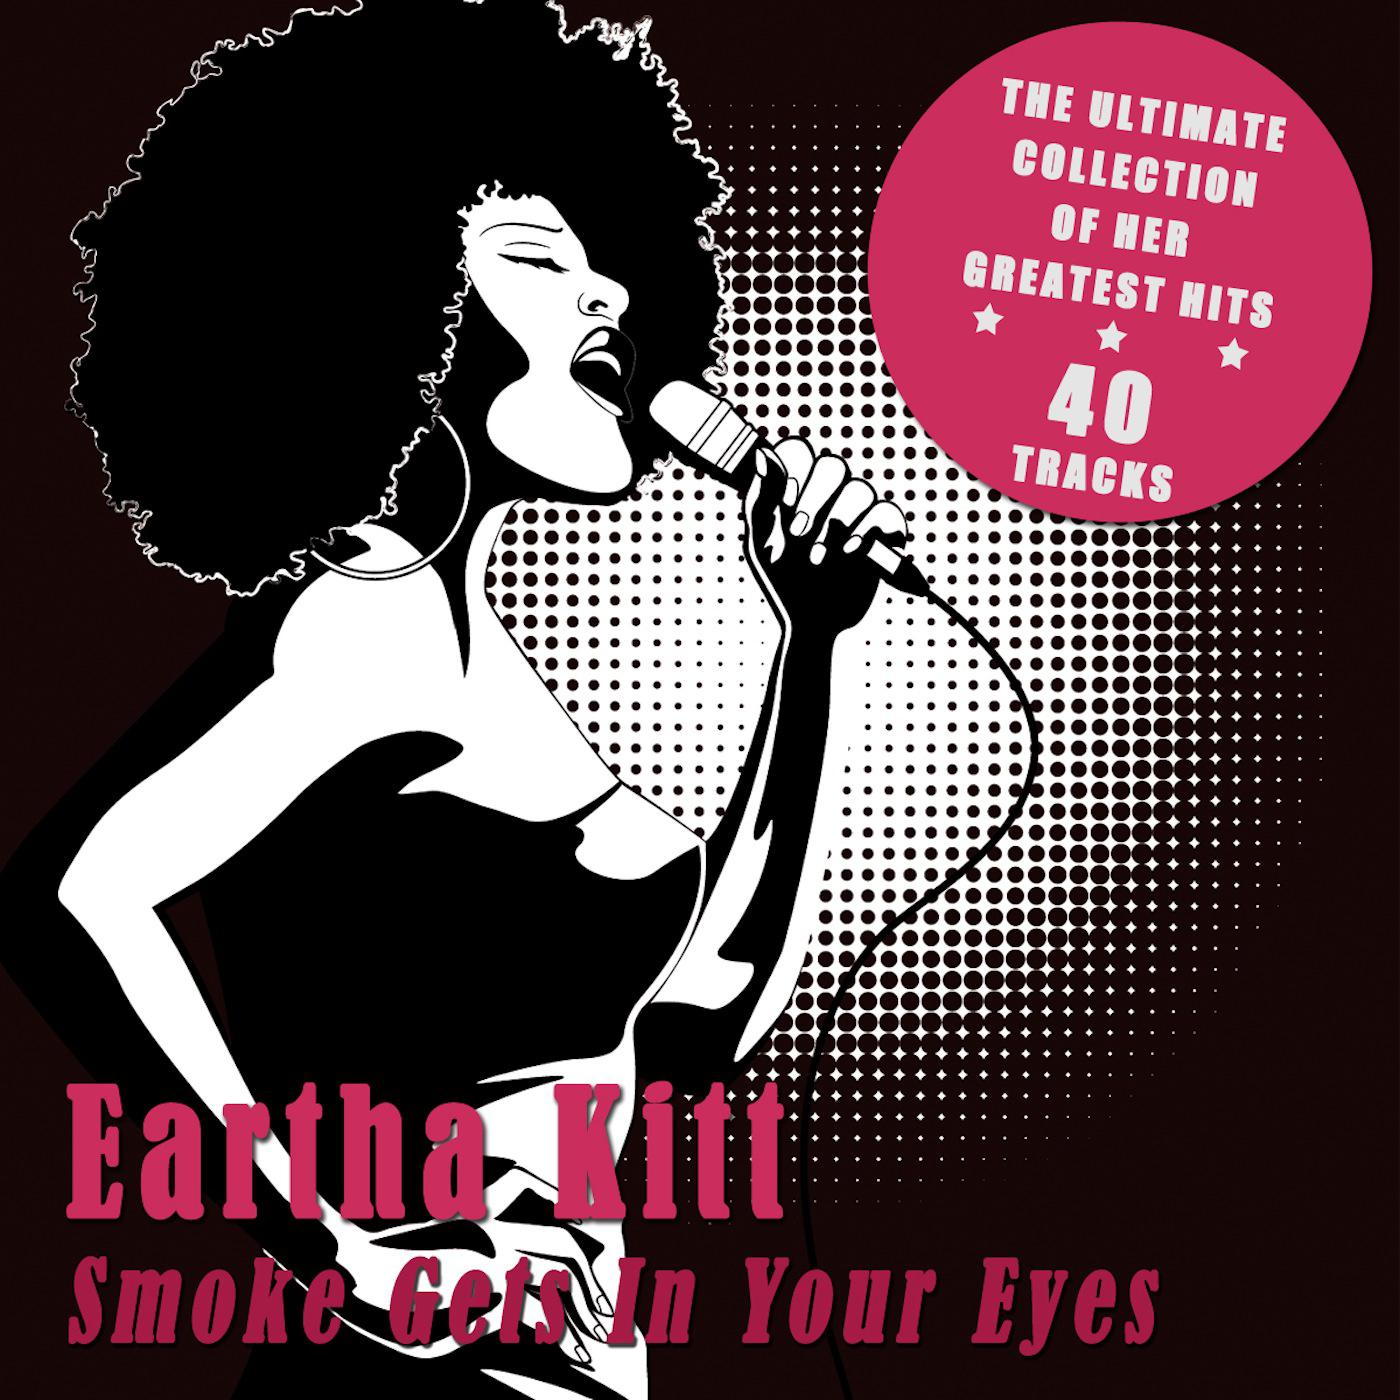 Smoke Gets in Your Eyes - The Ultimate Collection of Her Greatest Hits